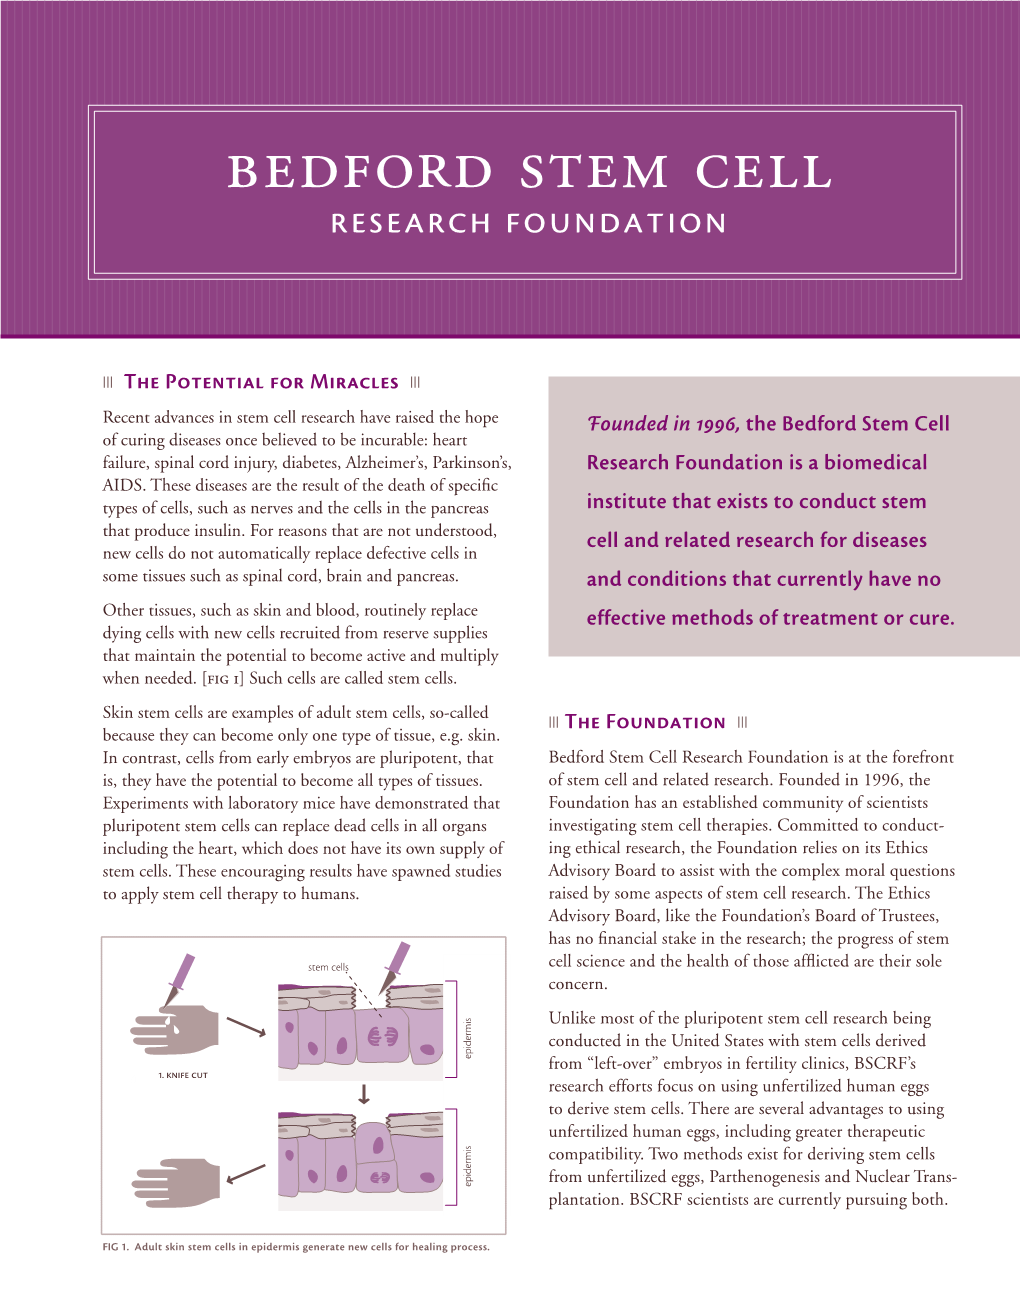 Bedford Stem Cell Research Foundation